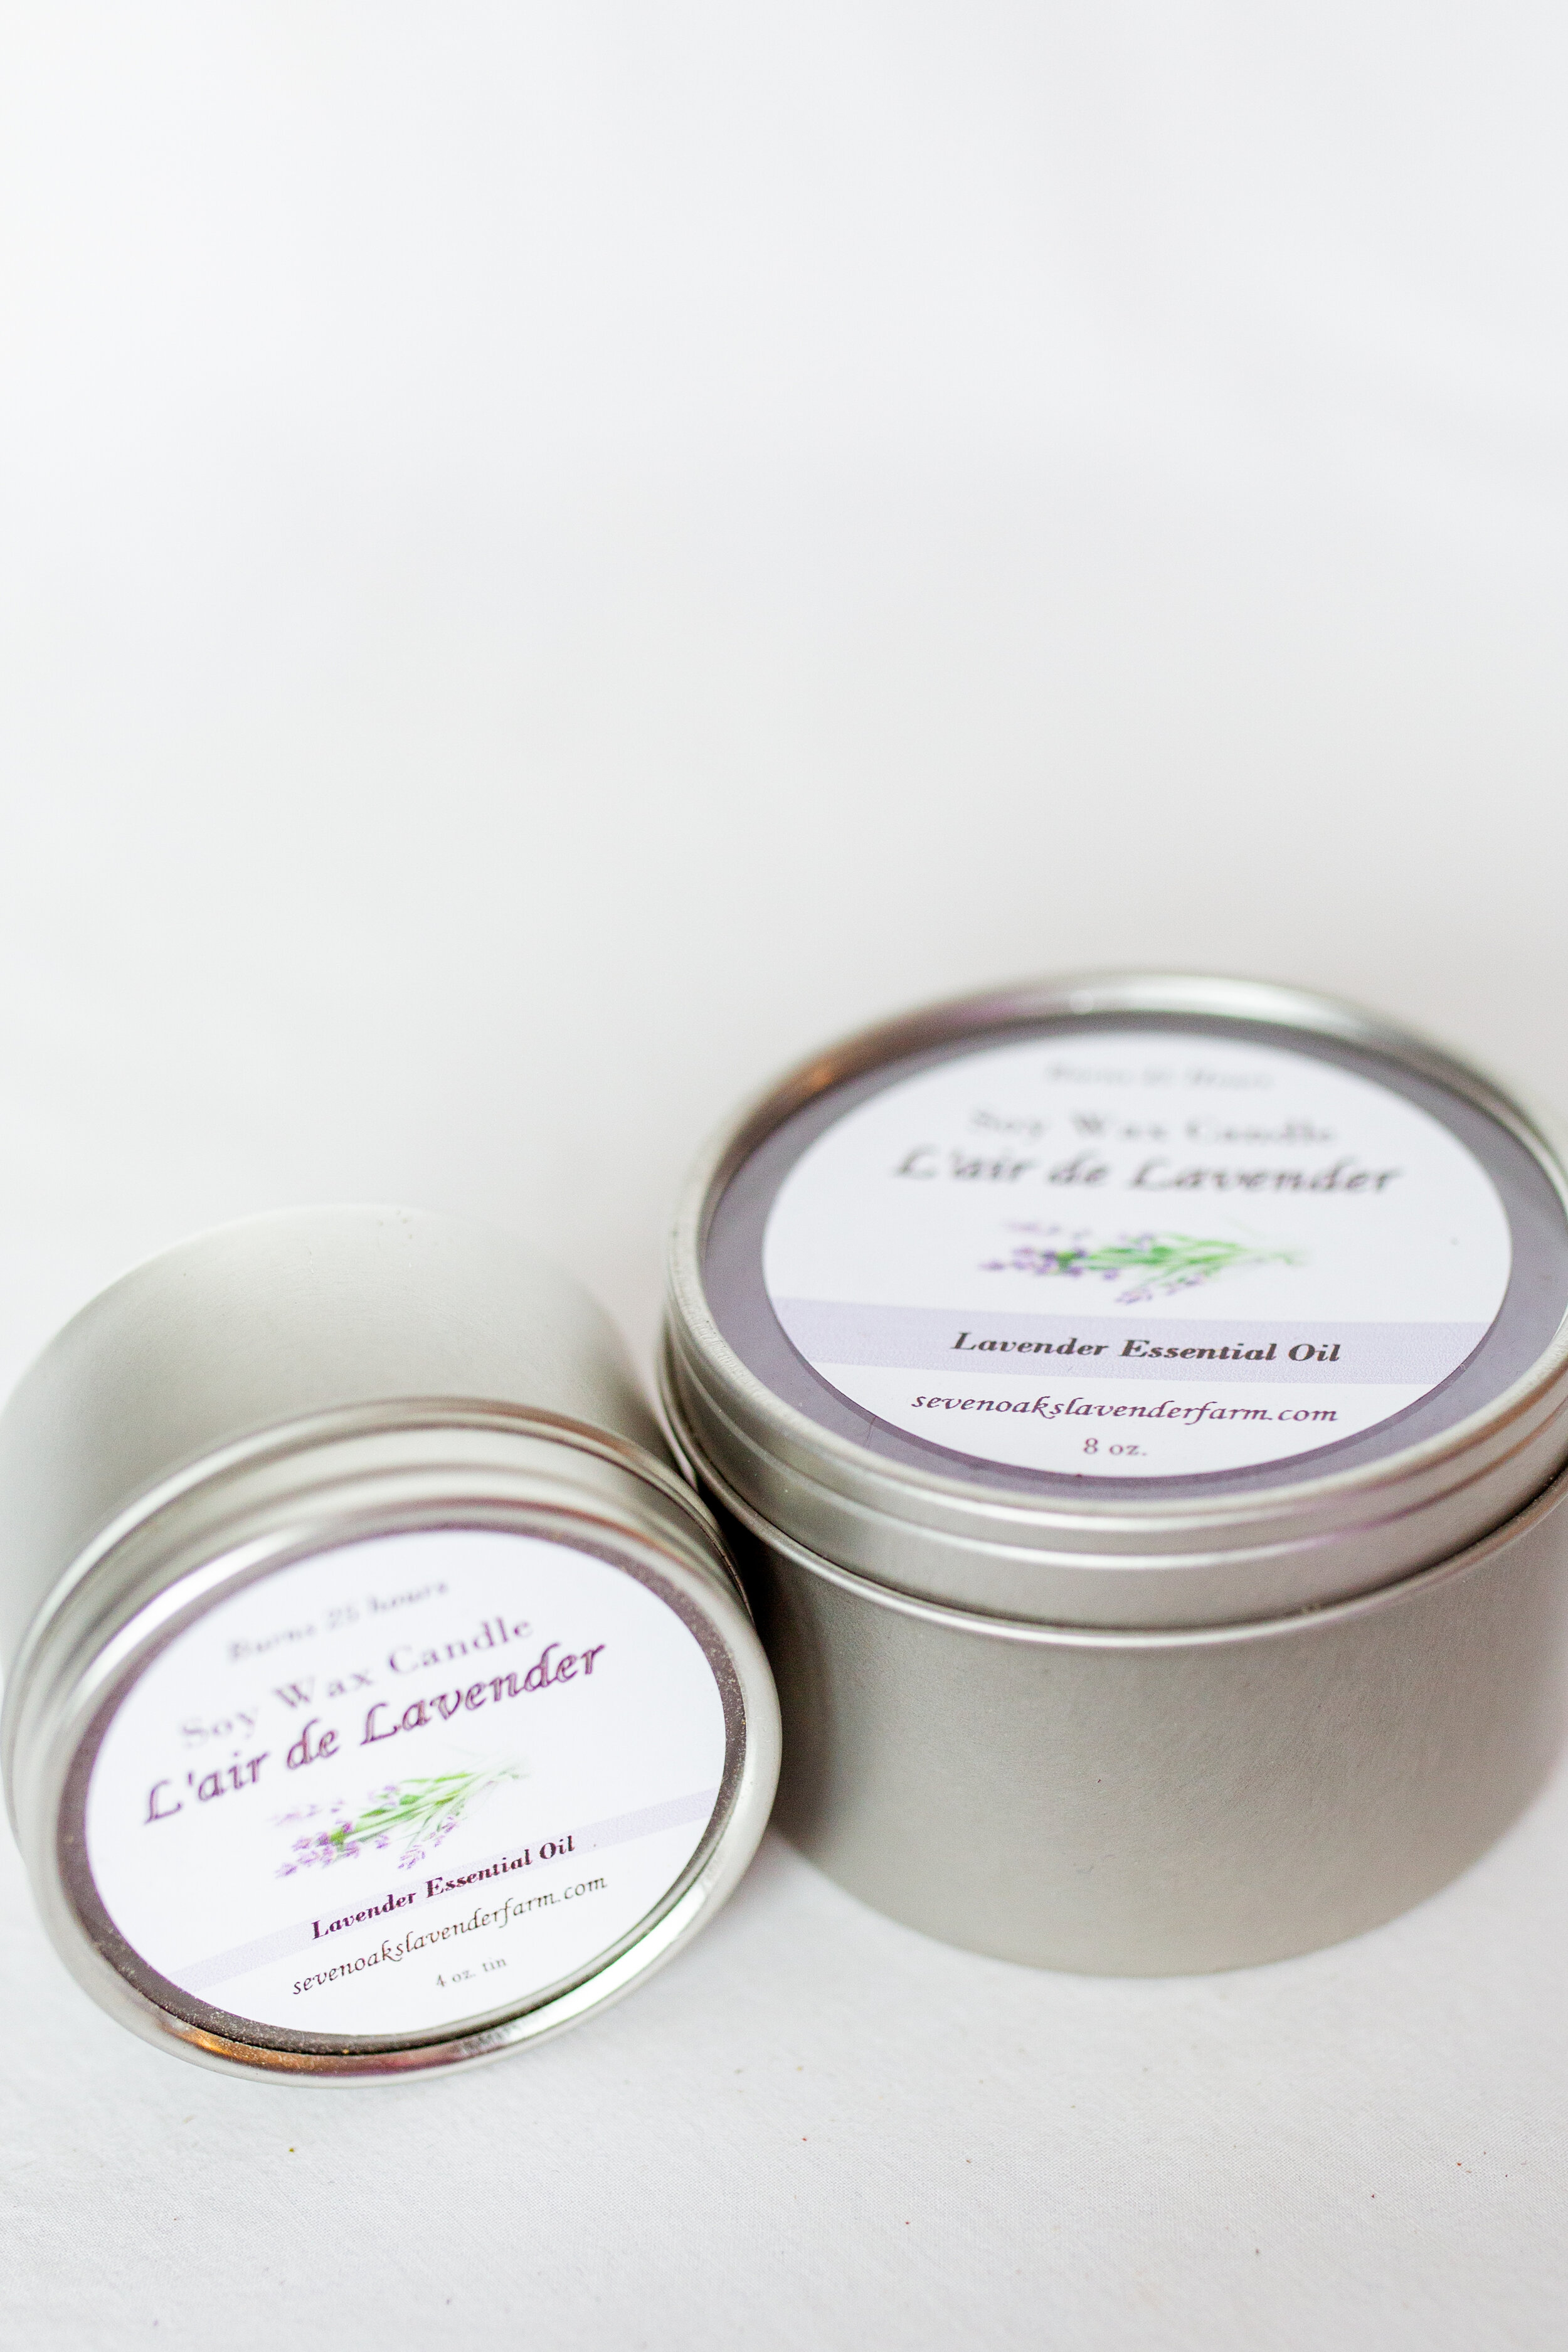 Soy Wax Candles – Misty Valley Farm